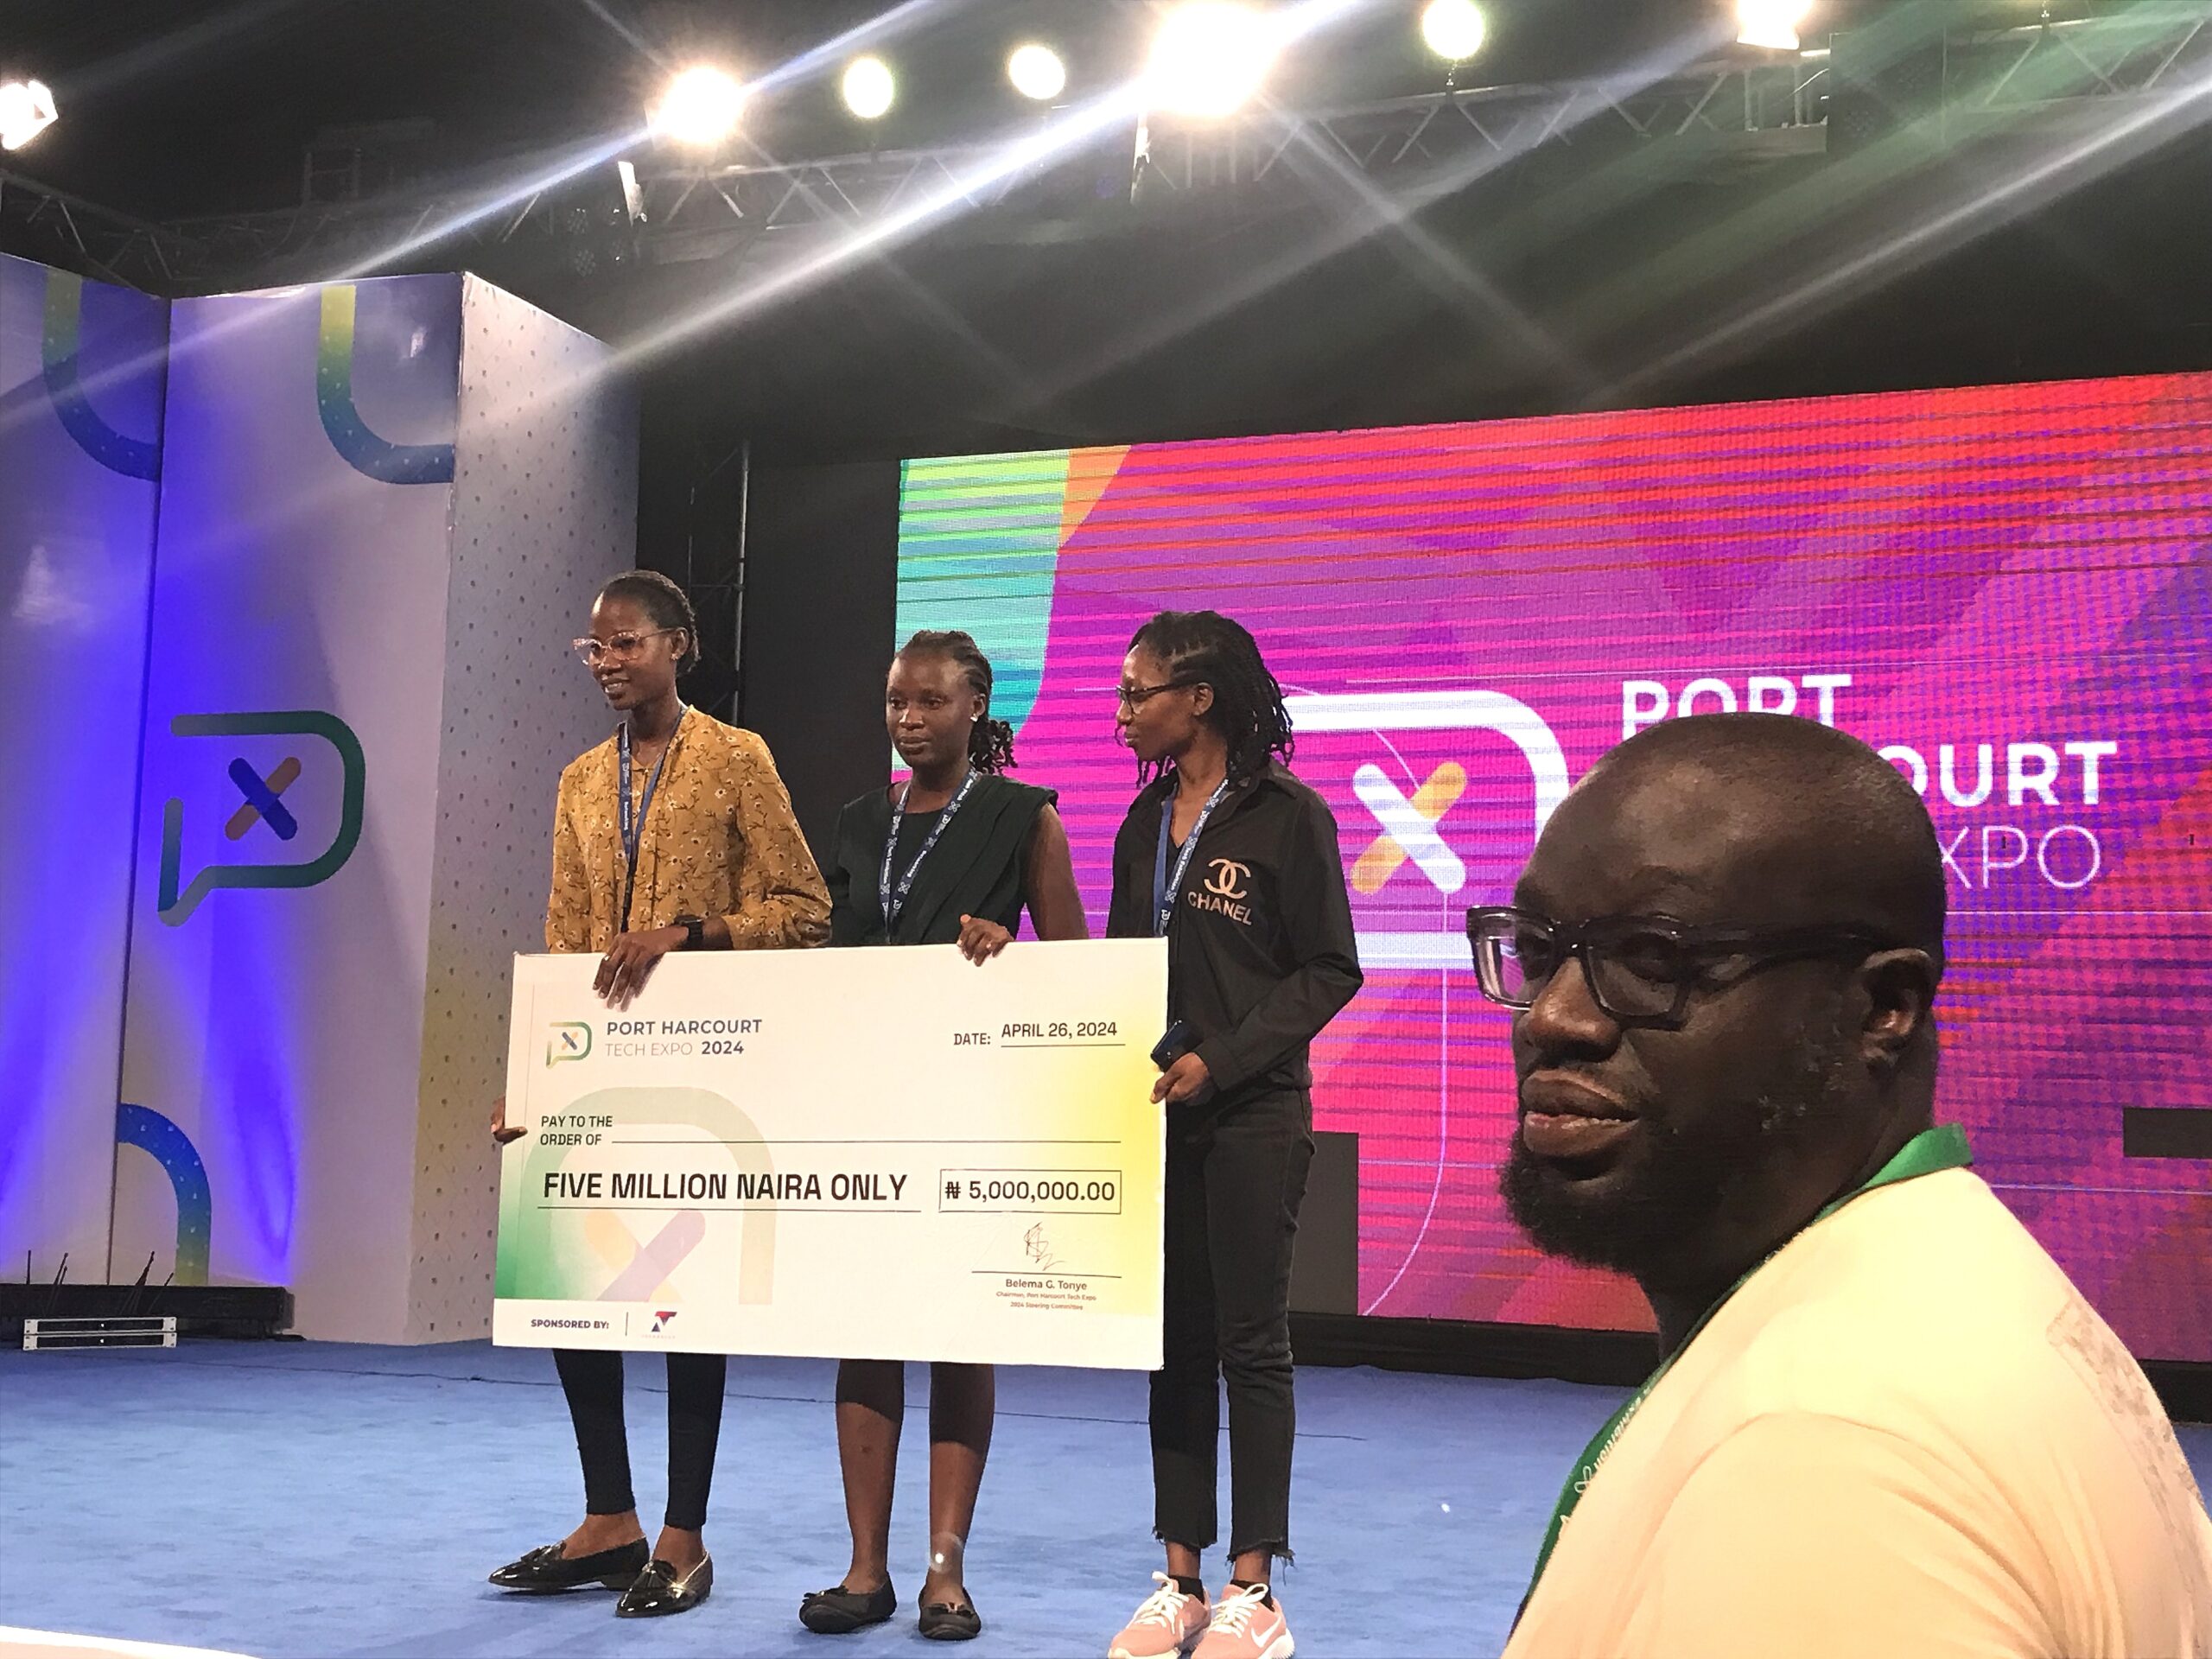 Port Harcourt Tech Expo: How Agrovest won big and their plan to empower farmers in Nigeria